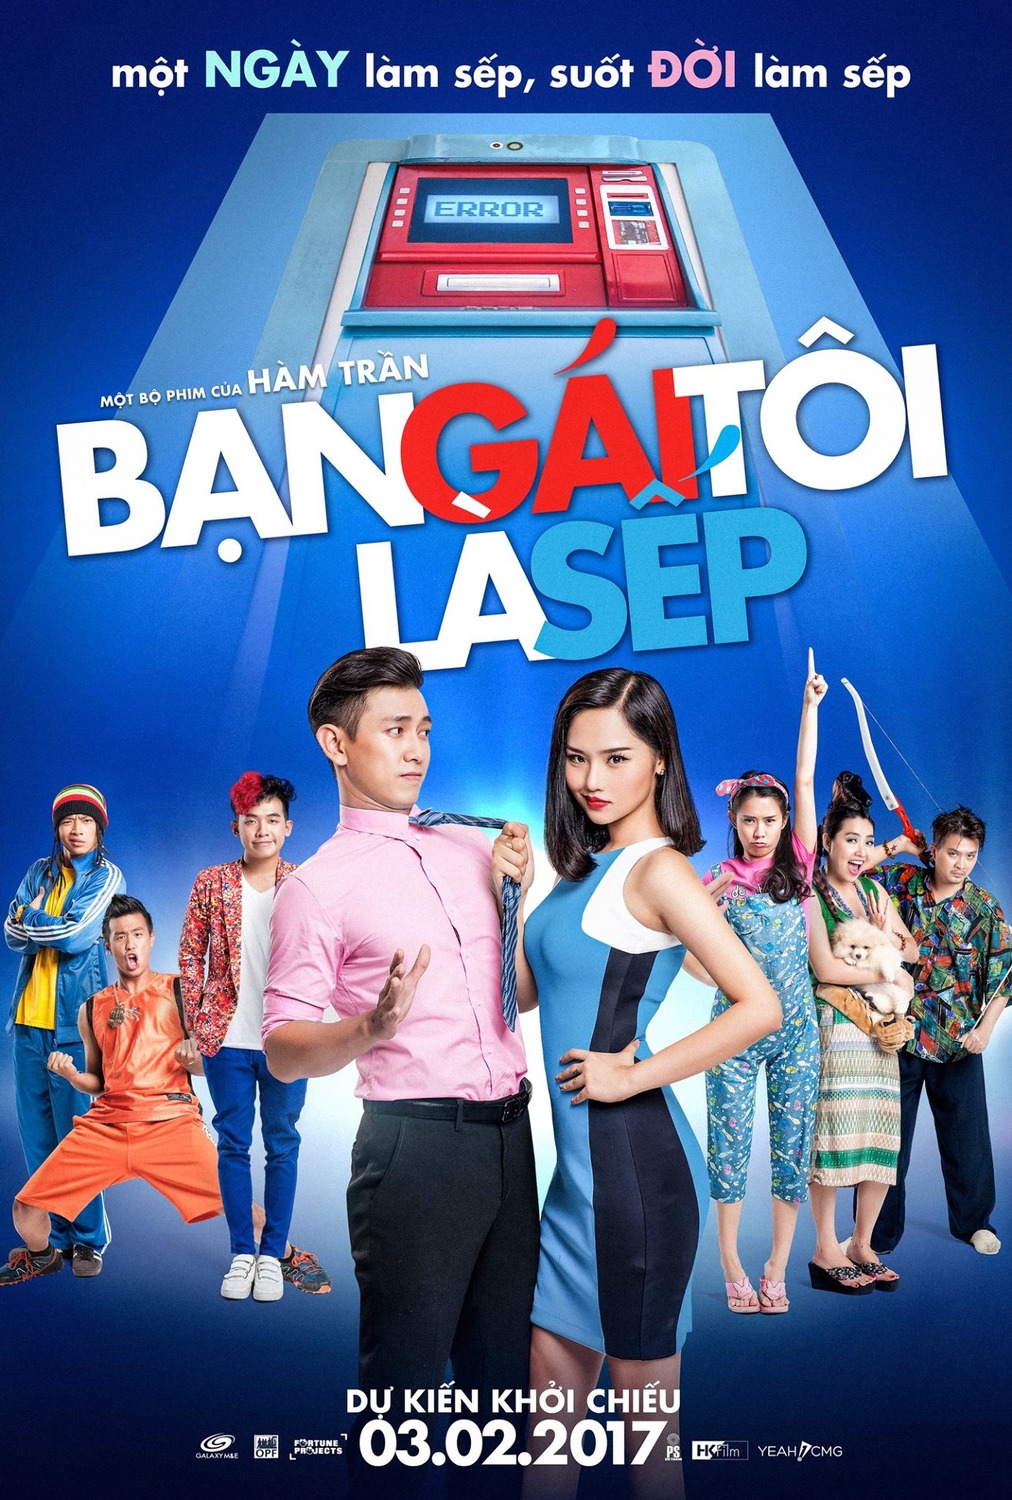 Extra Large Movie Poster Image for Ban Gai Toi La Sep (#8 of 15)